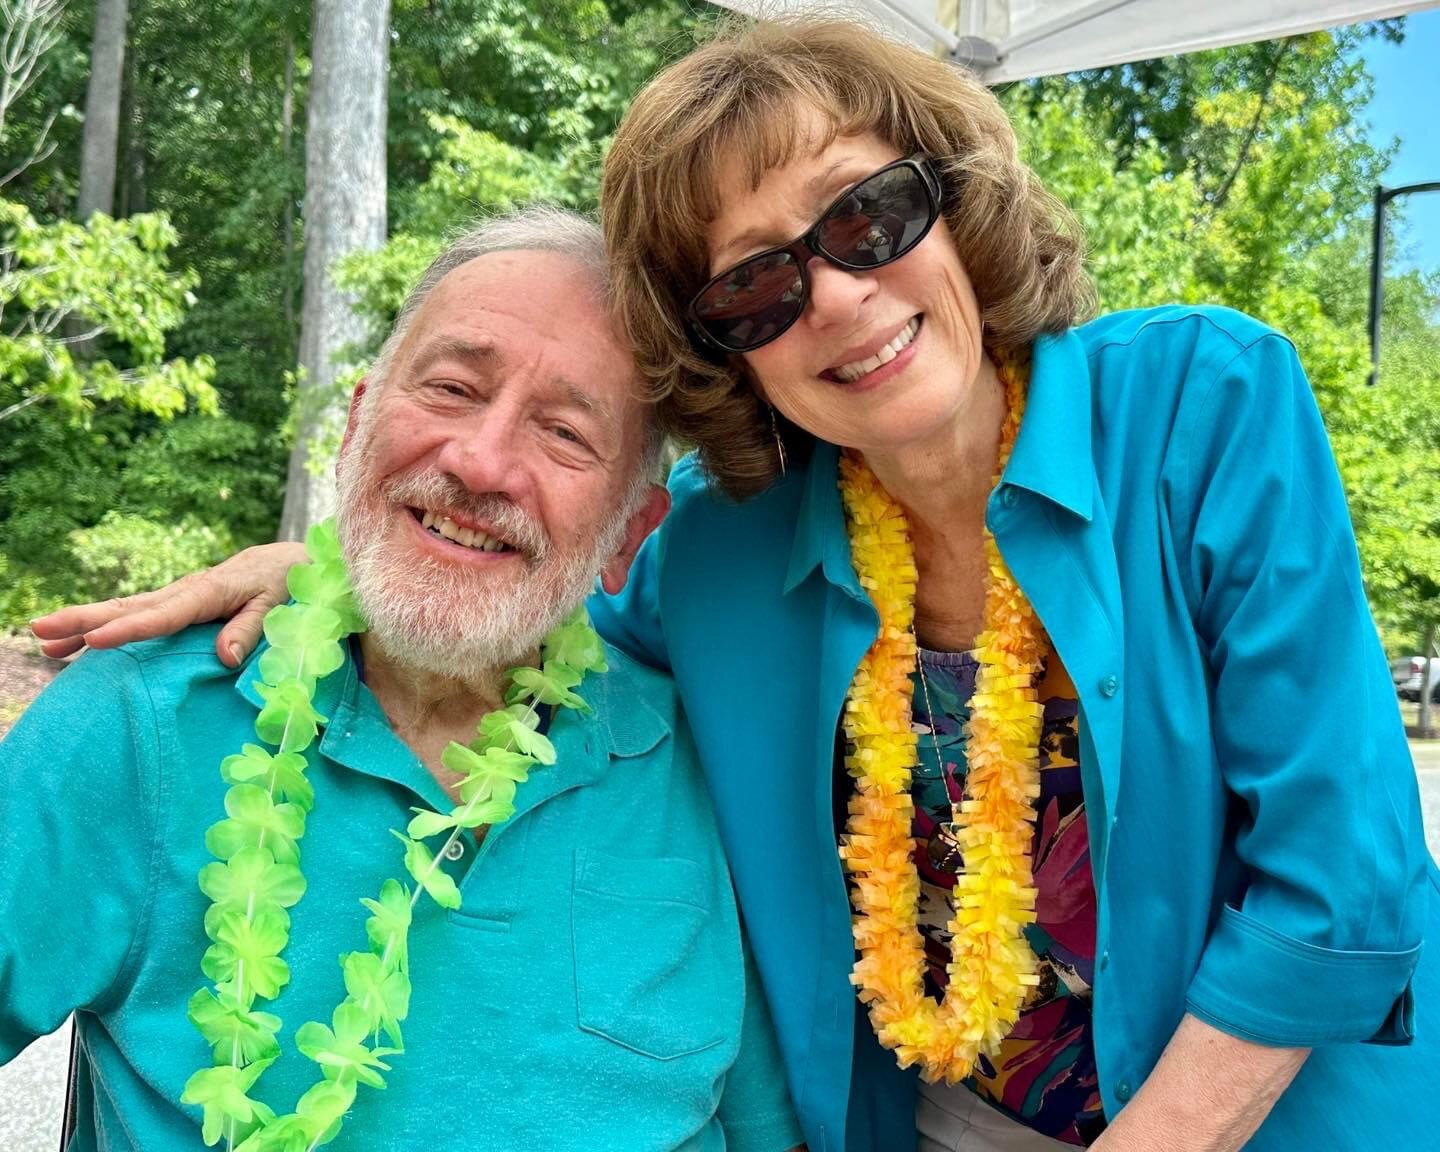 Spring Arbor residents Edward and Linda Roebuck enjoyed a luau event where caregivers in respite care had a chance to socialize with residents and have fun.